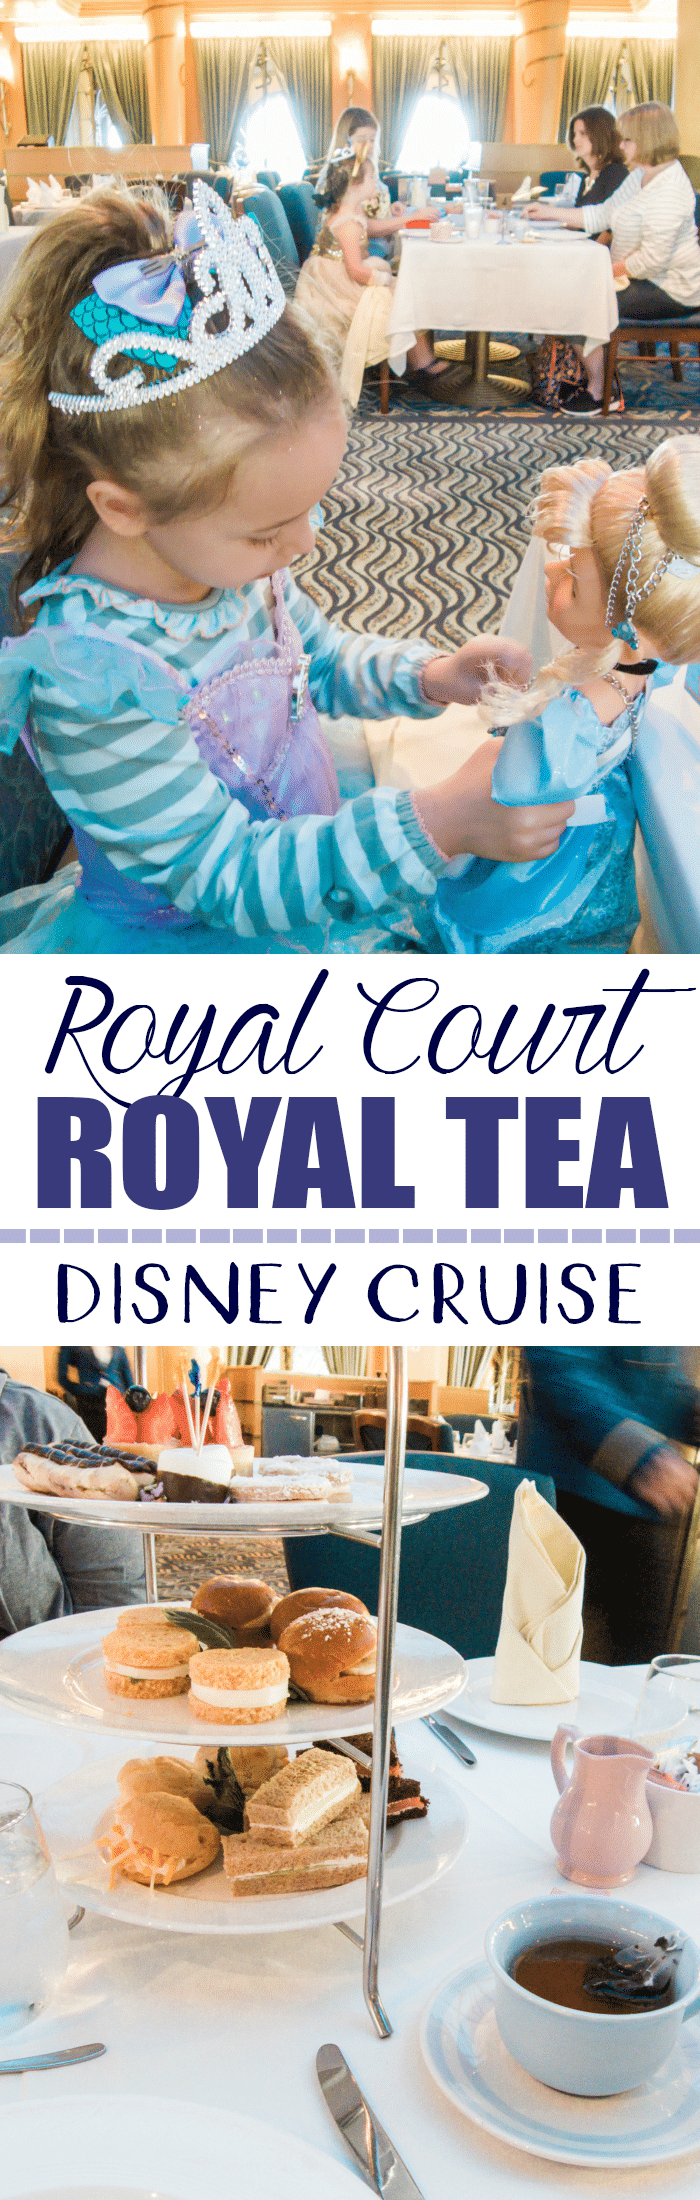 Make Your Disney Cruise Extra Special with Royal Court Royal Tea Party 